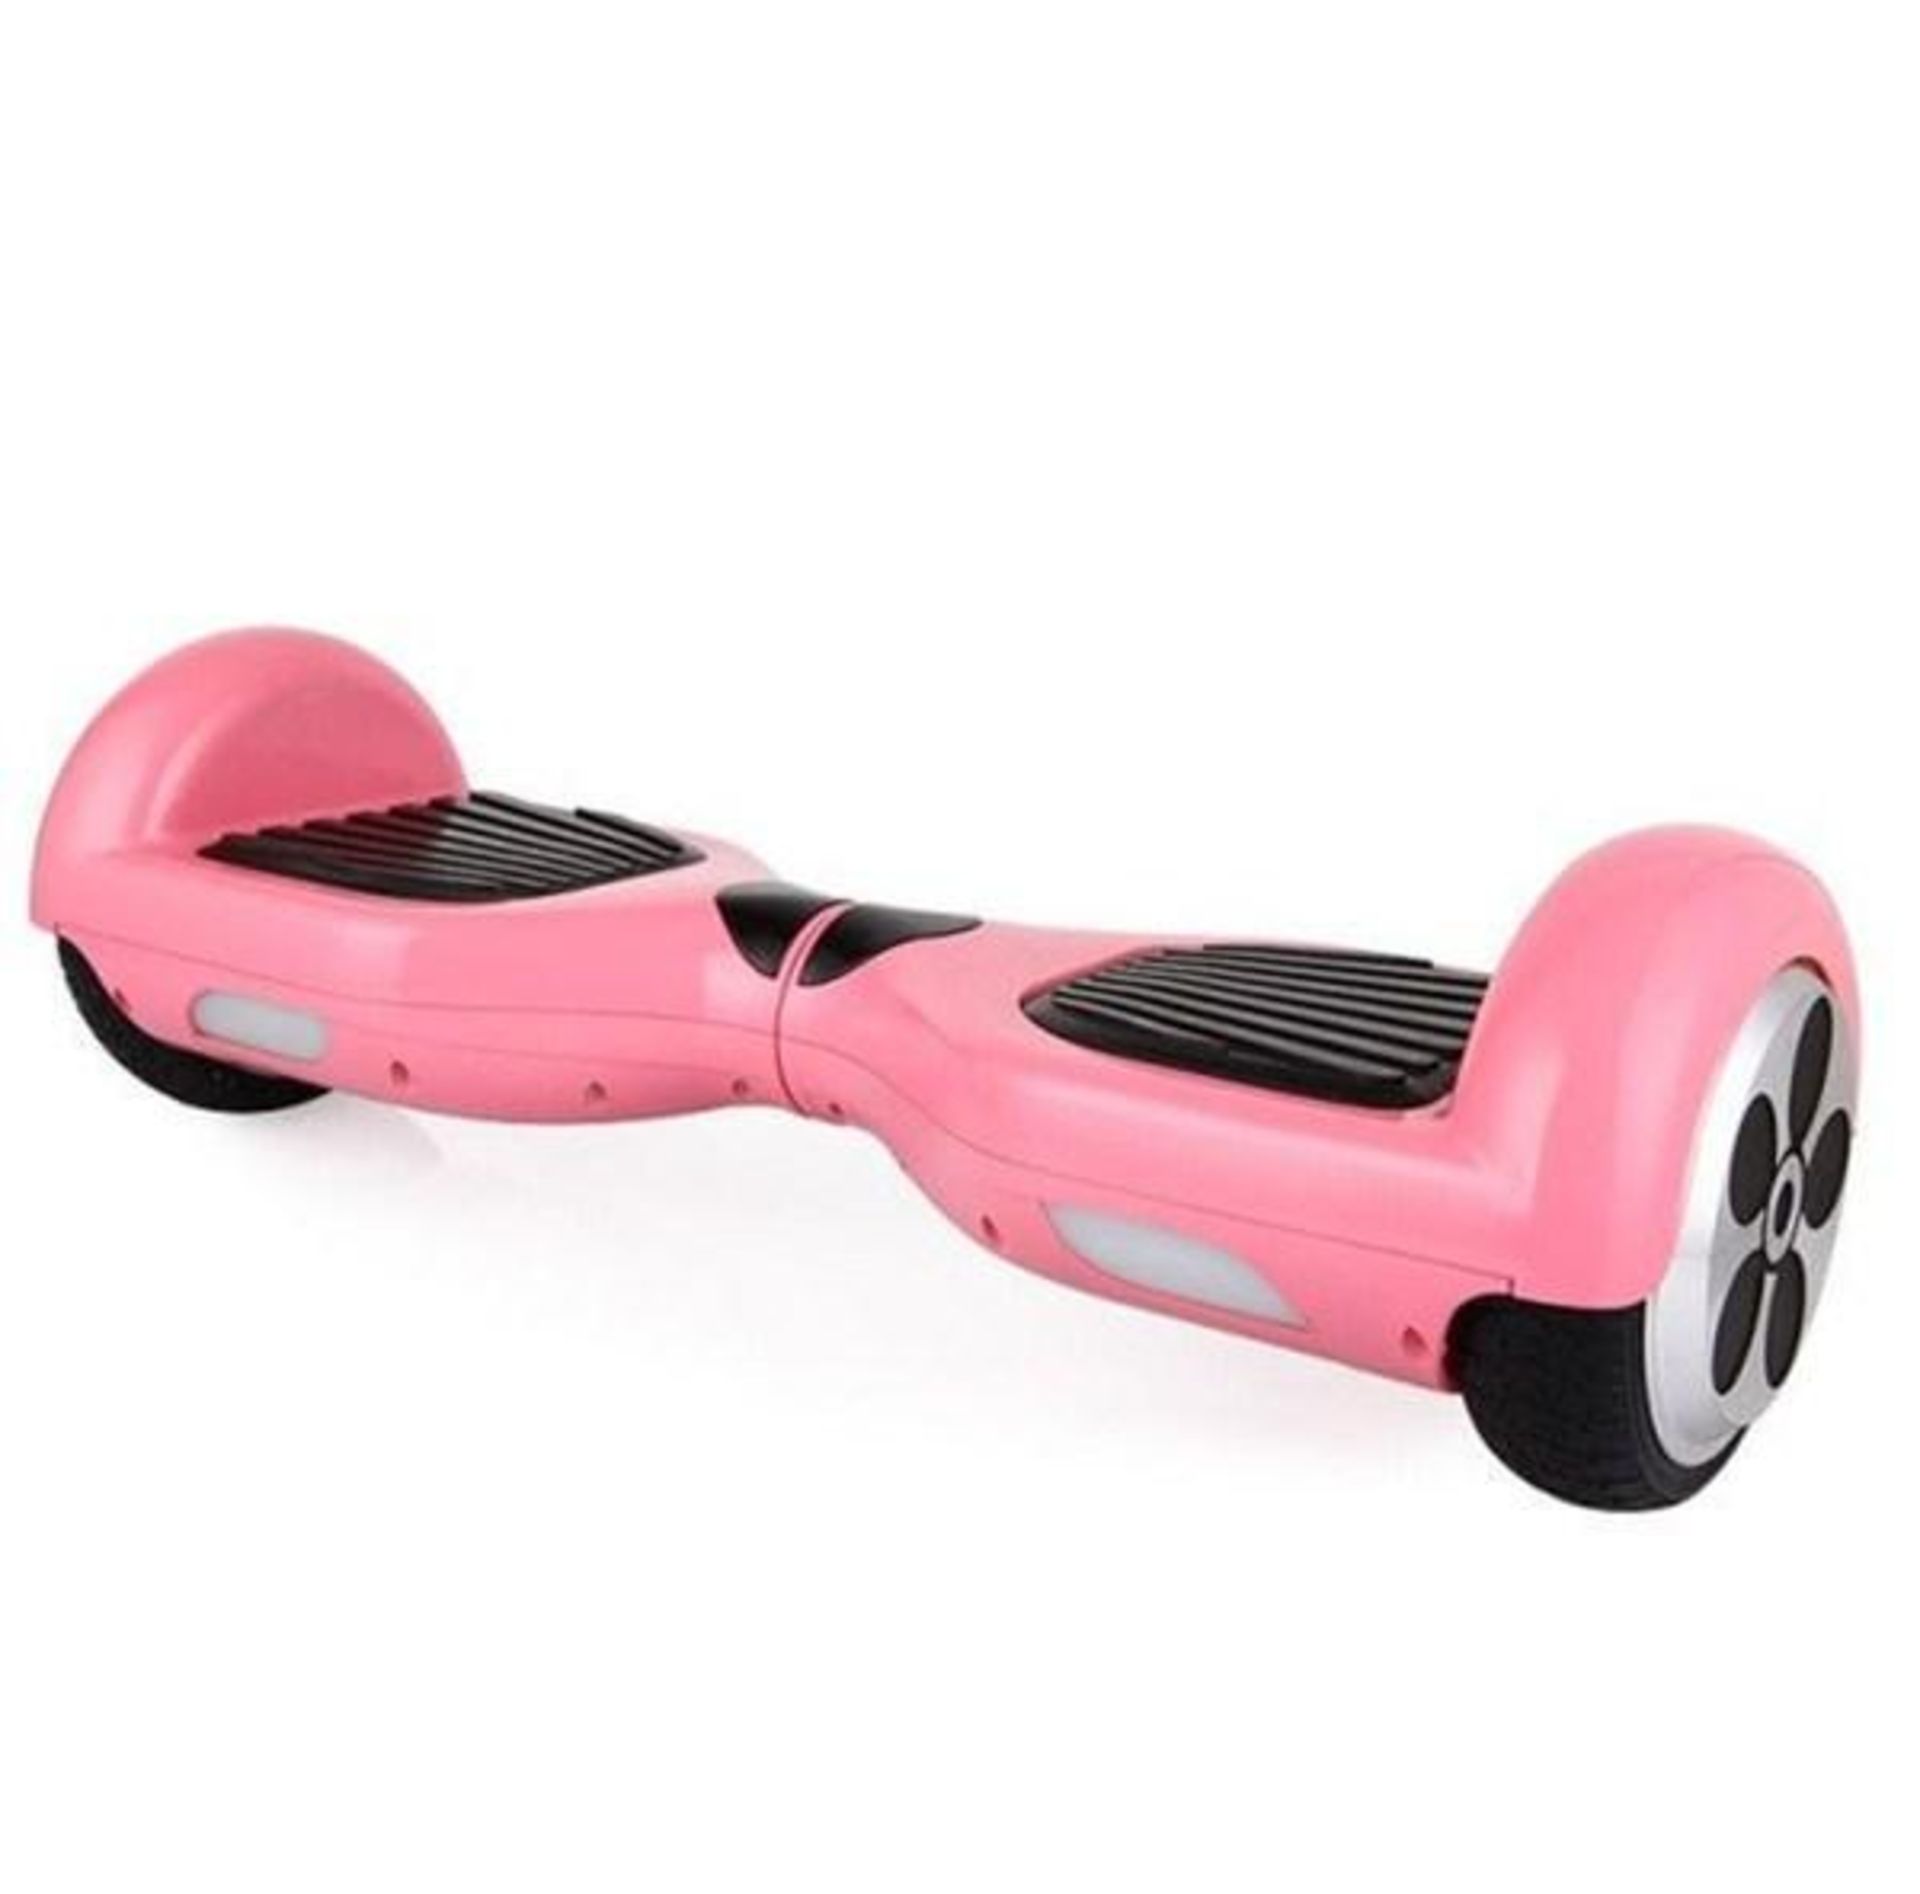 7" Balance Board In Limited Edition Pink (Please See Description For Full Specification)